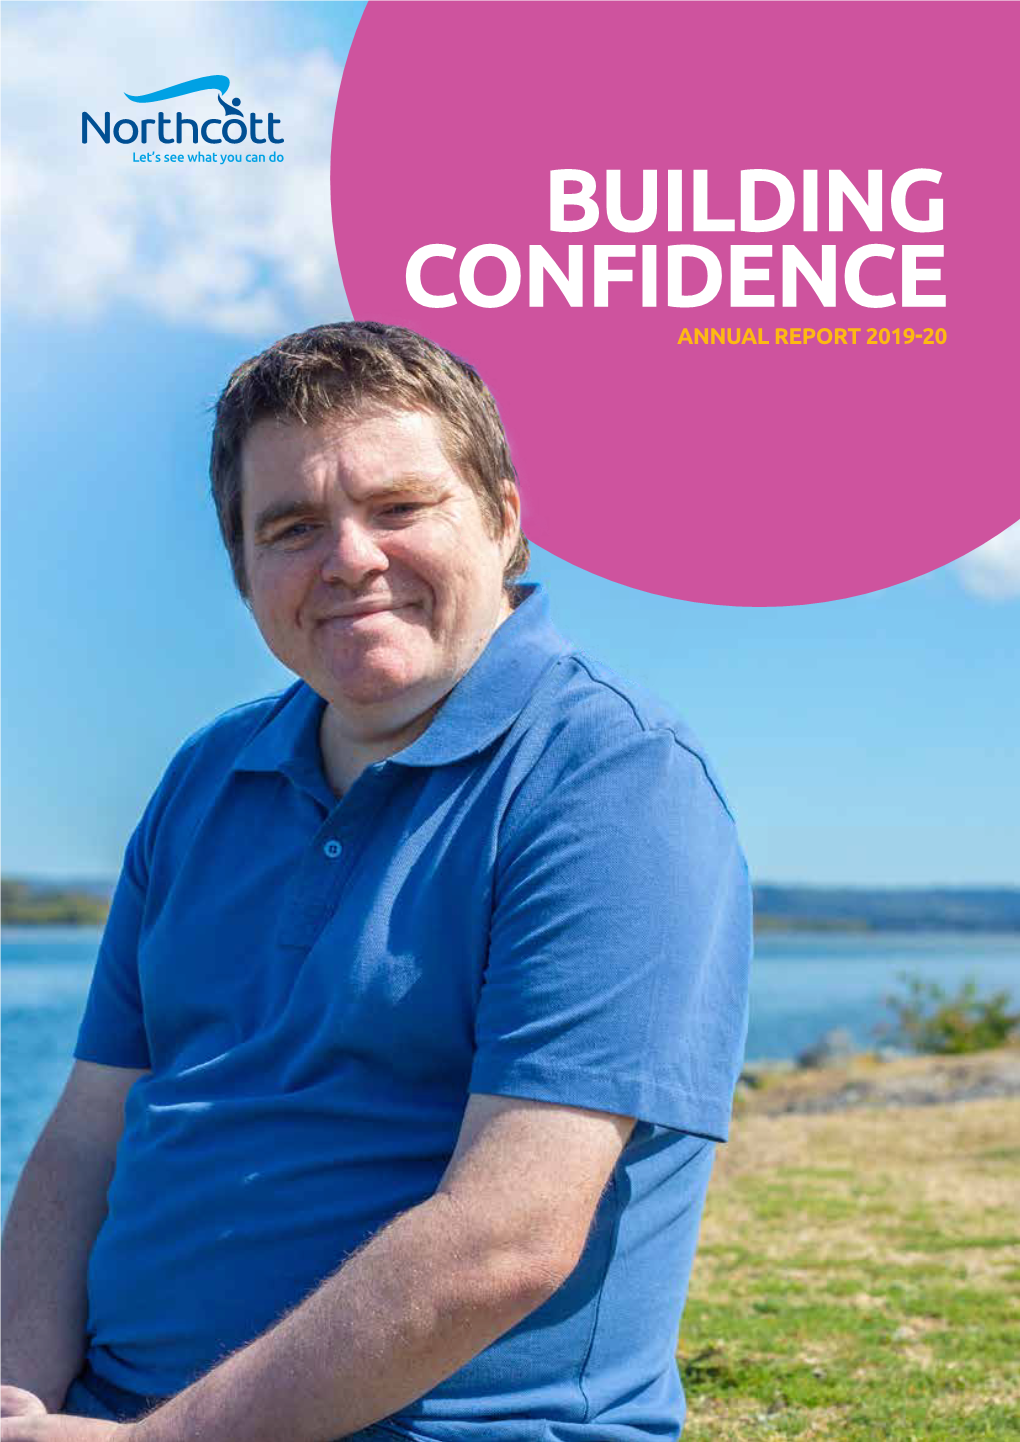 BUILDING CONFIDENCE ANNUAL REPORT 2019-20 a Whole New Level of Confidence